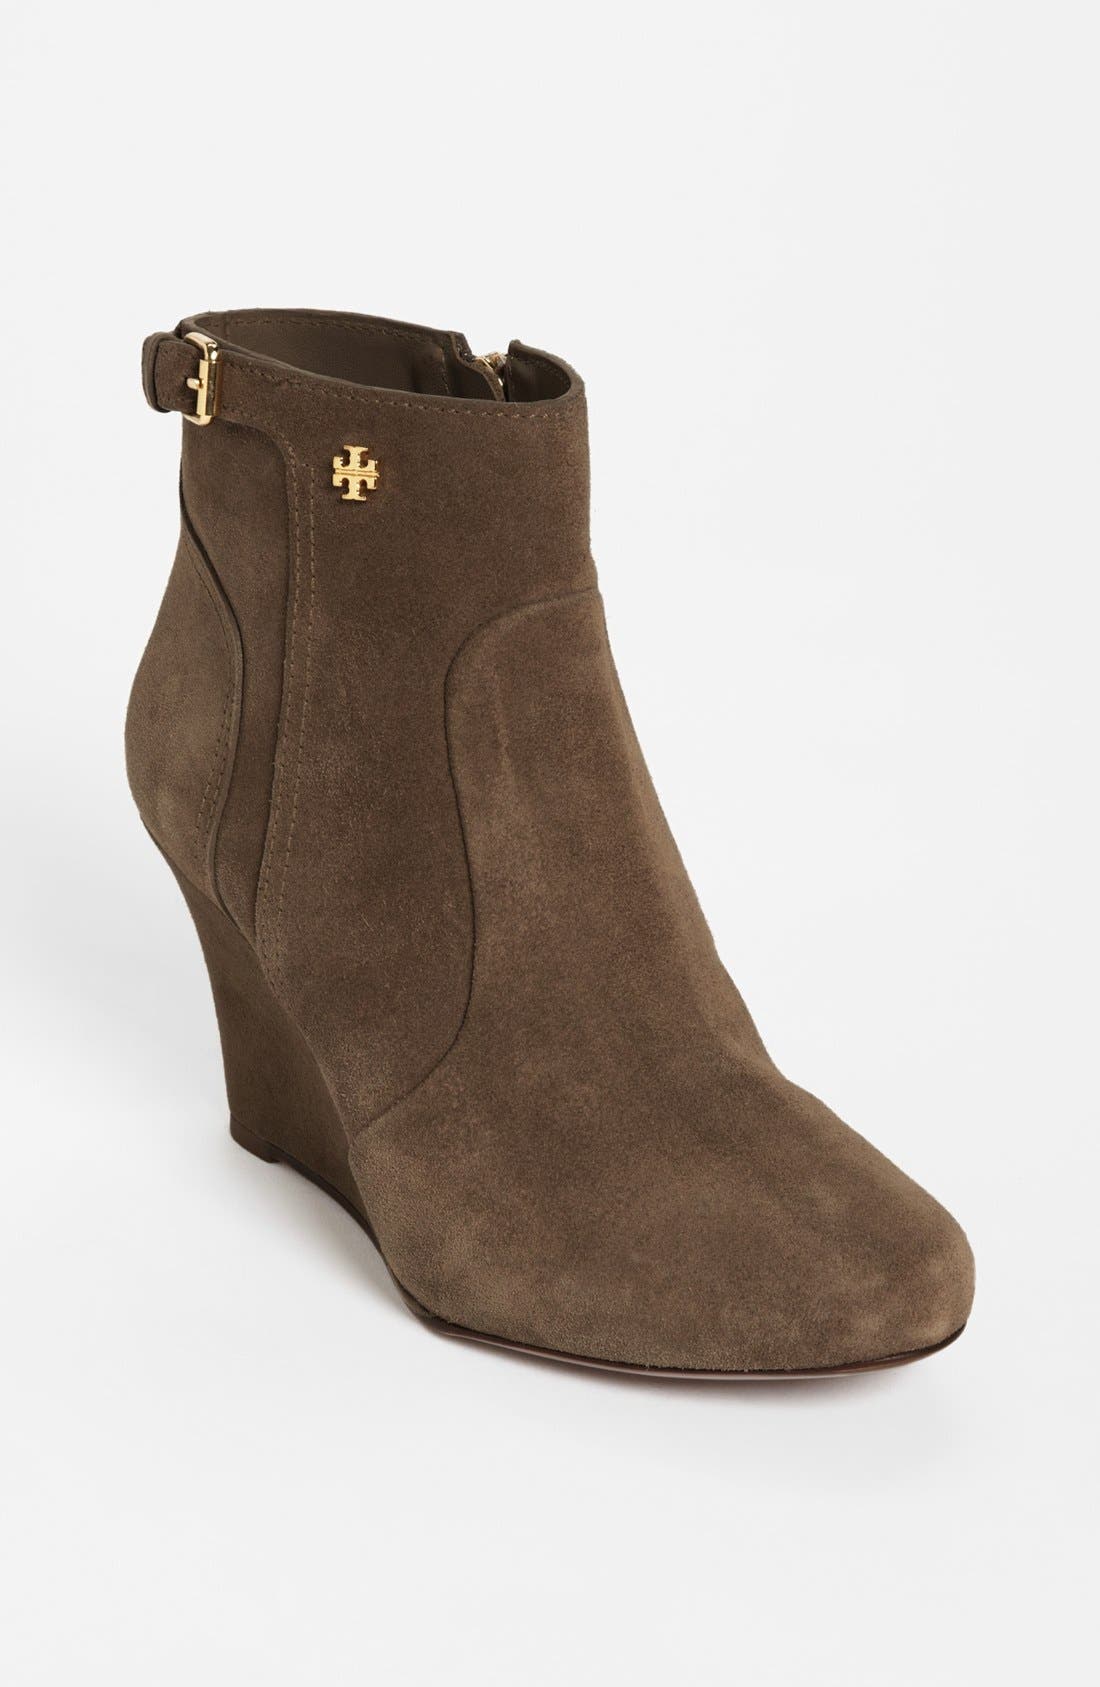 tory burch wedge boots